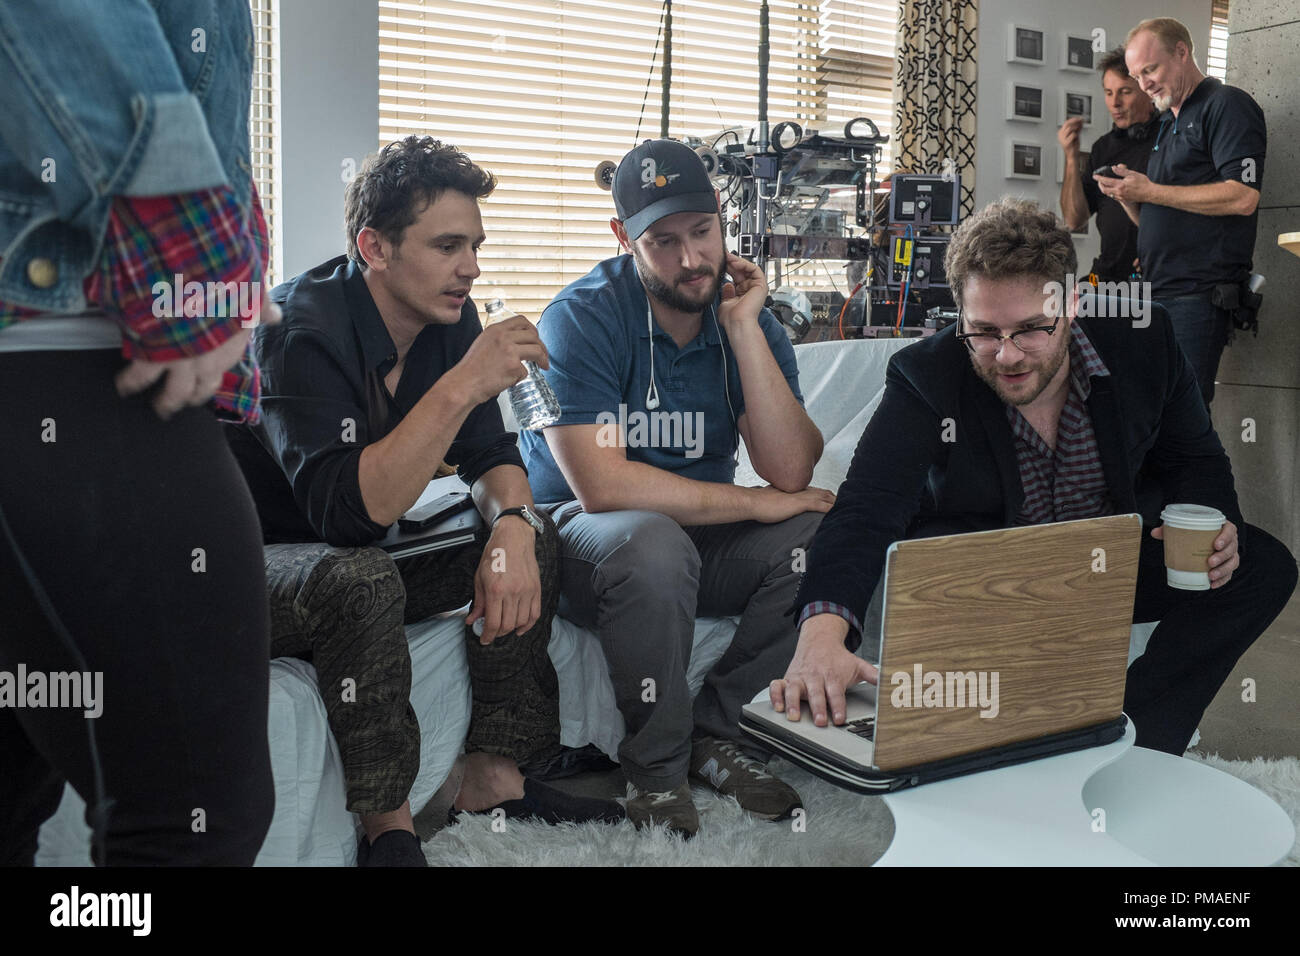 James Franco, Evan Goldberg and Seth Rogen on set of Columbia Pictures' THE INTERVIEW. Stock Photo